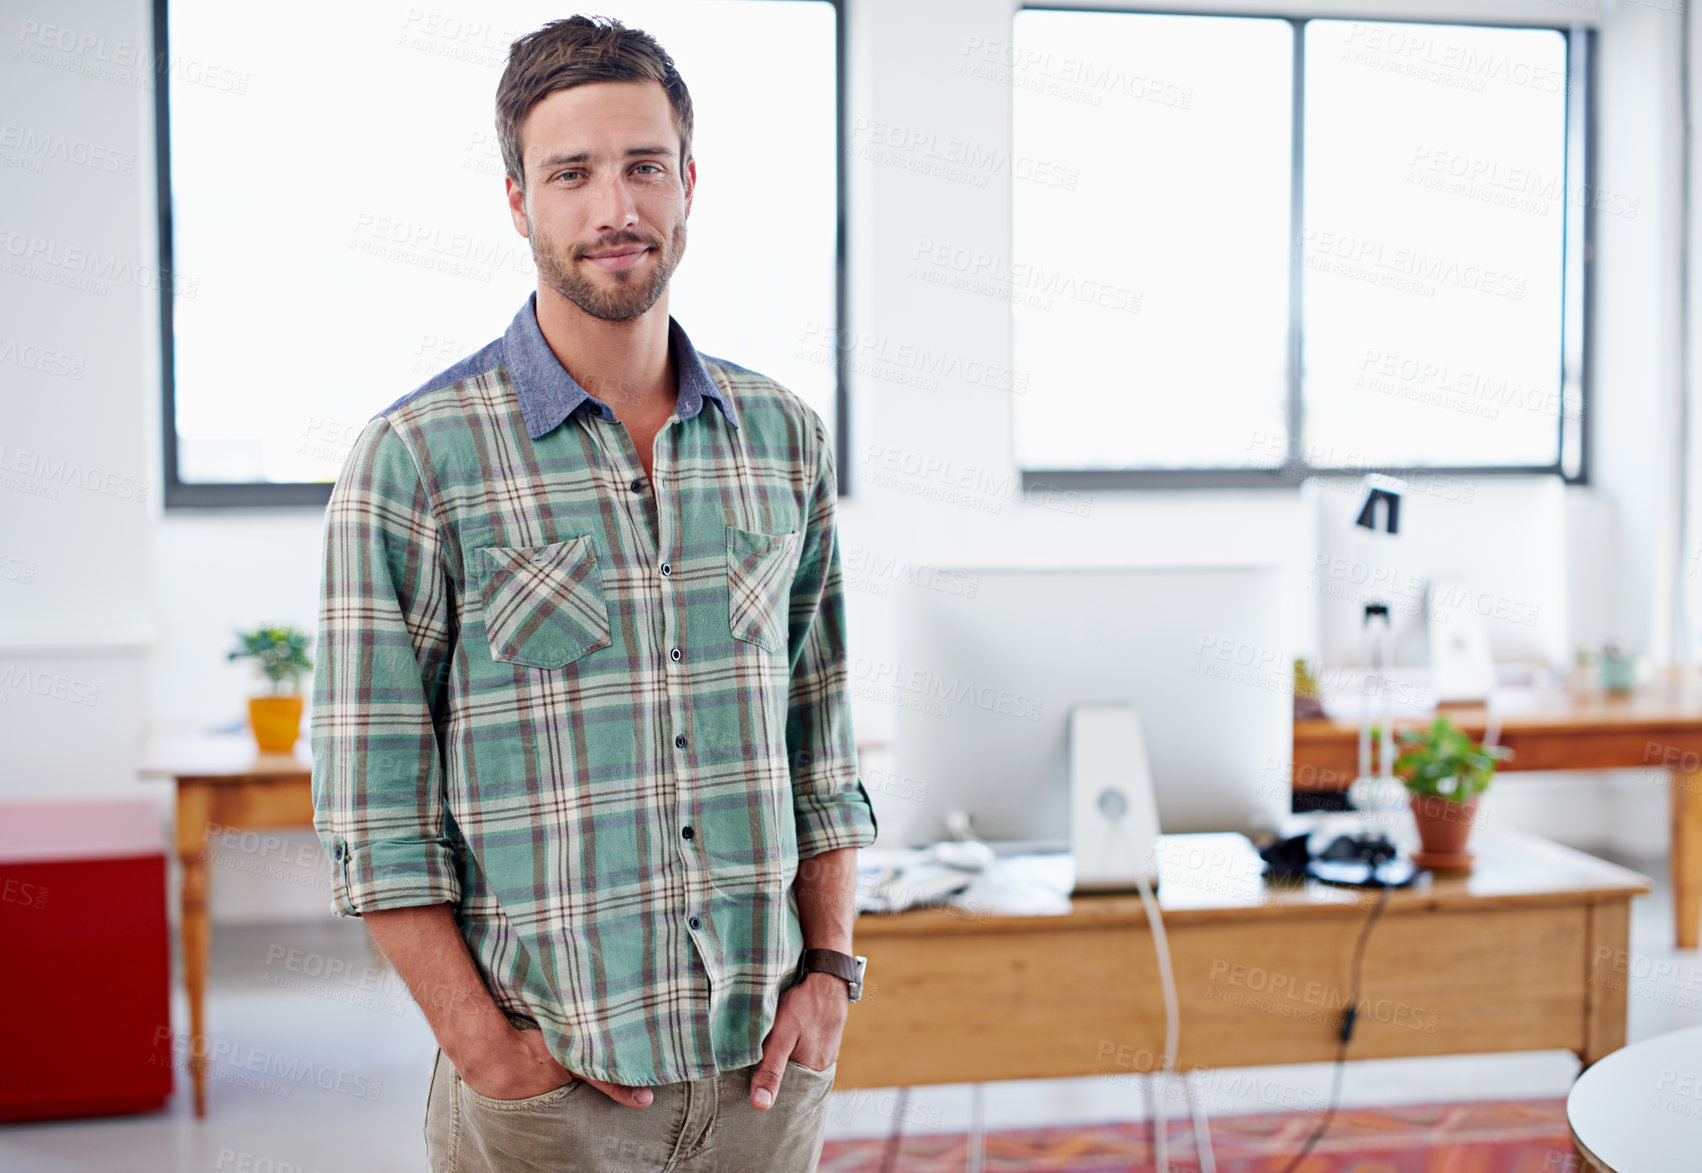 Buy stock photo Portrait of a stylish young man standing in an office